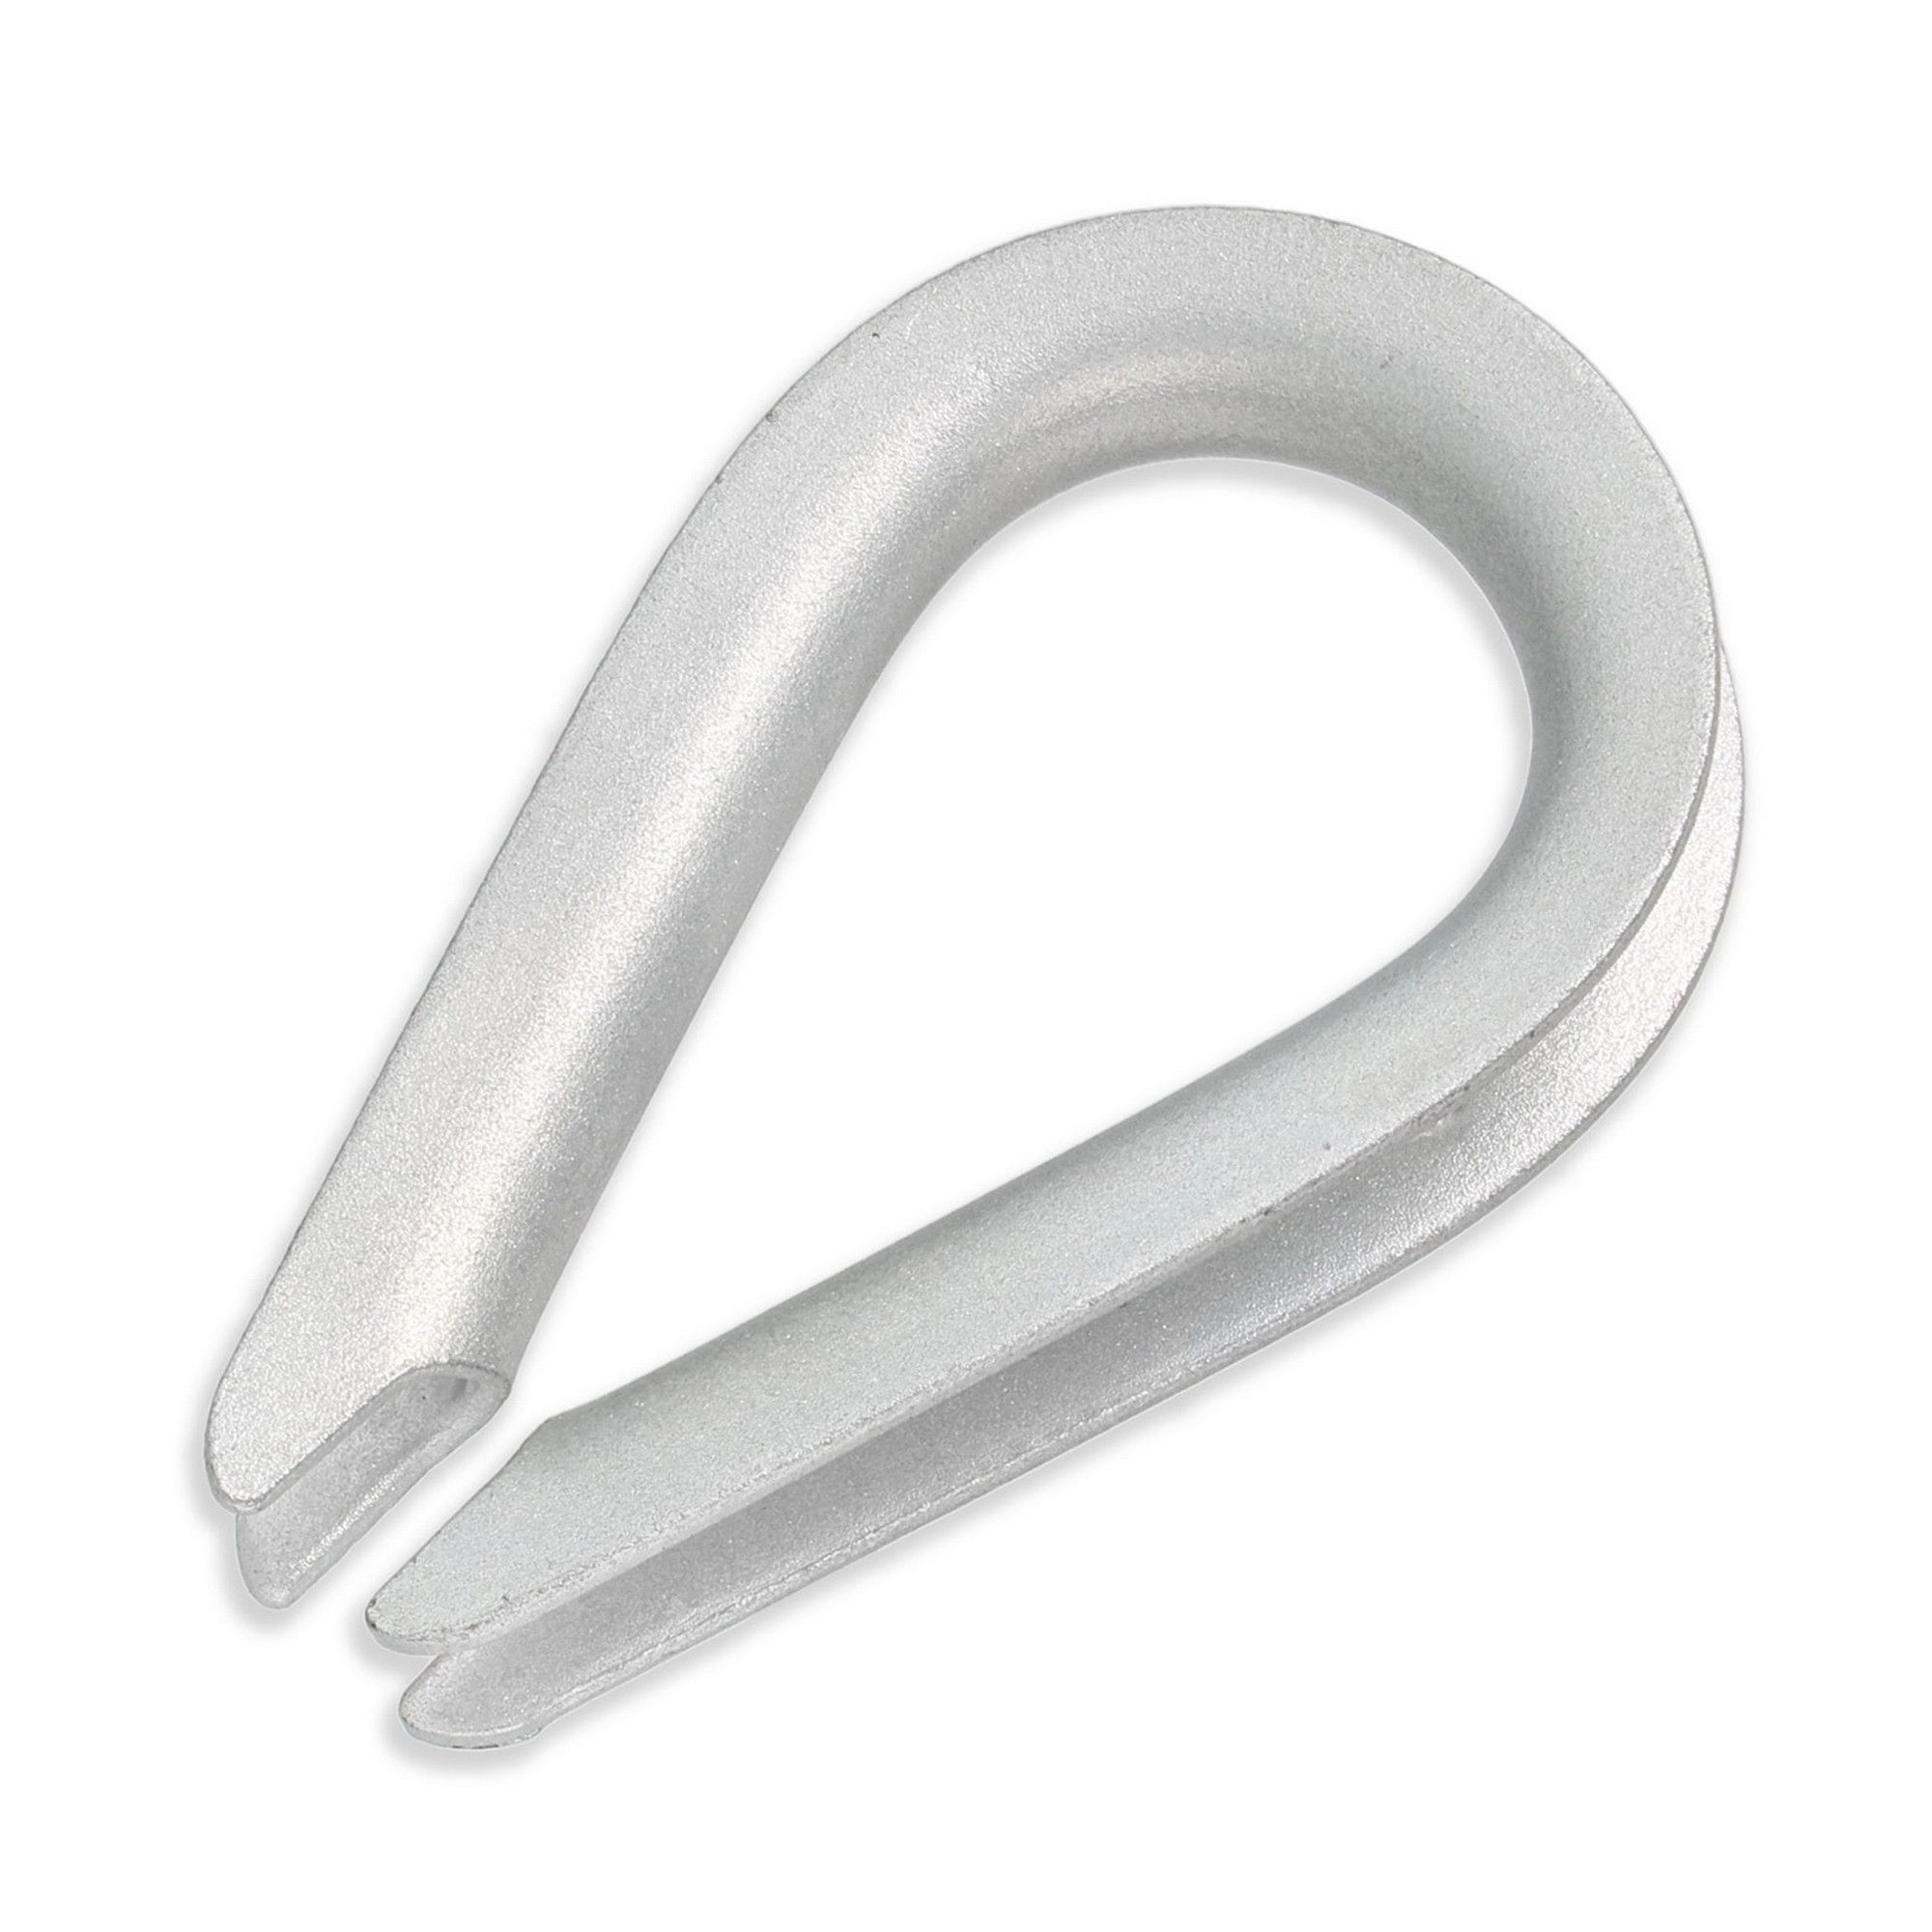 Wire Rope Thimble - Zinc - 1/8 from KINGCHAIN